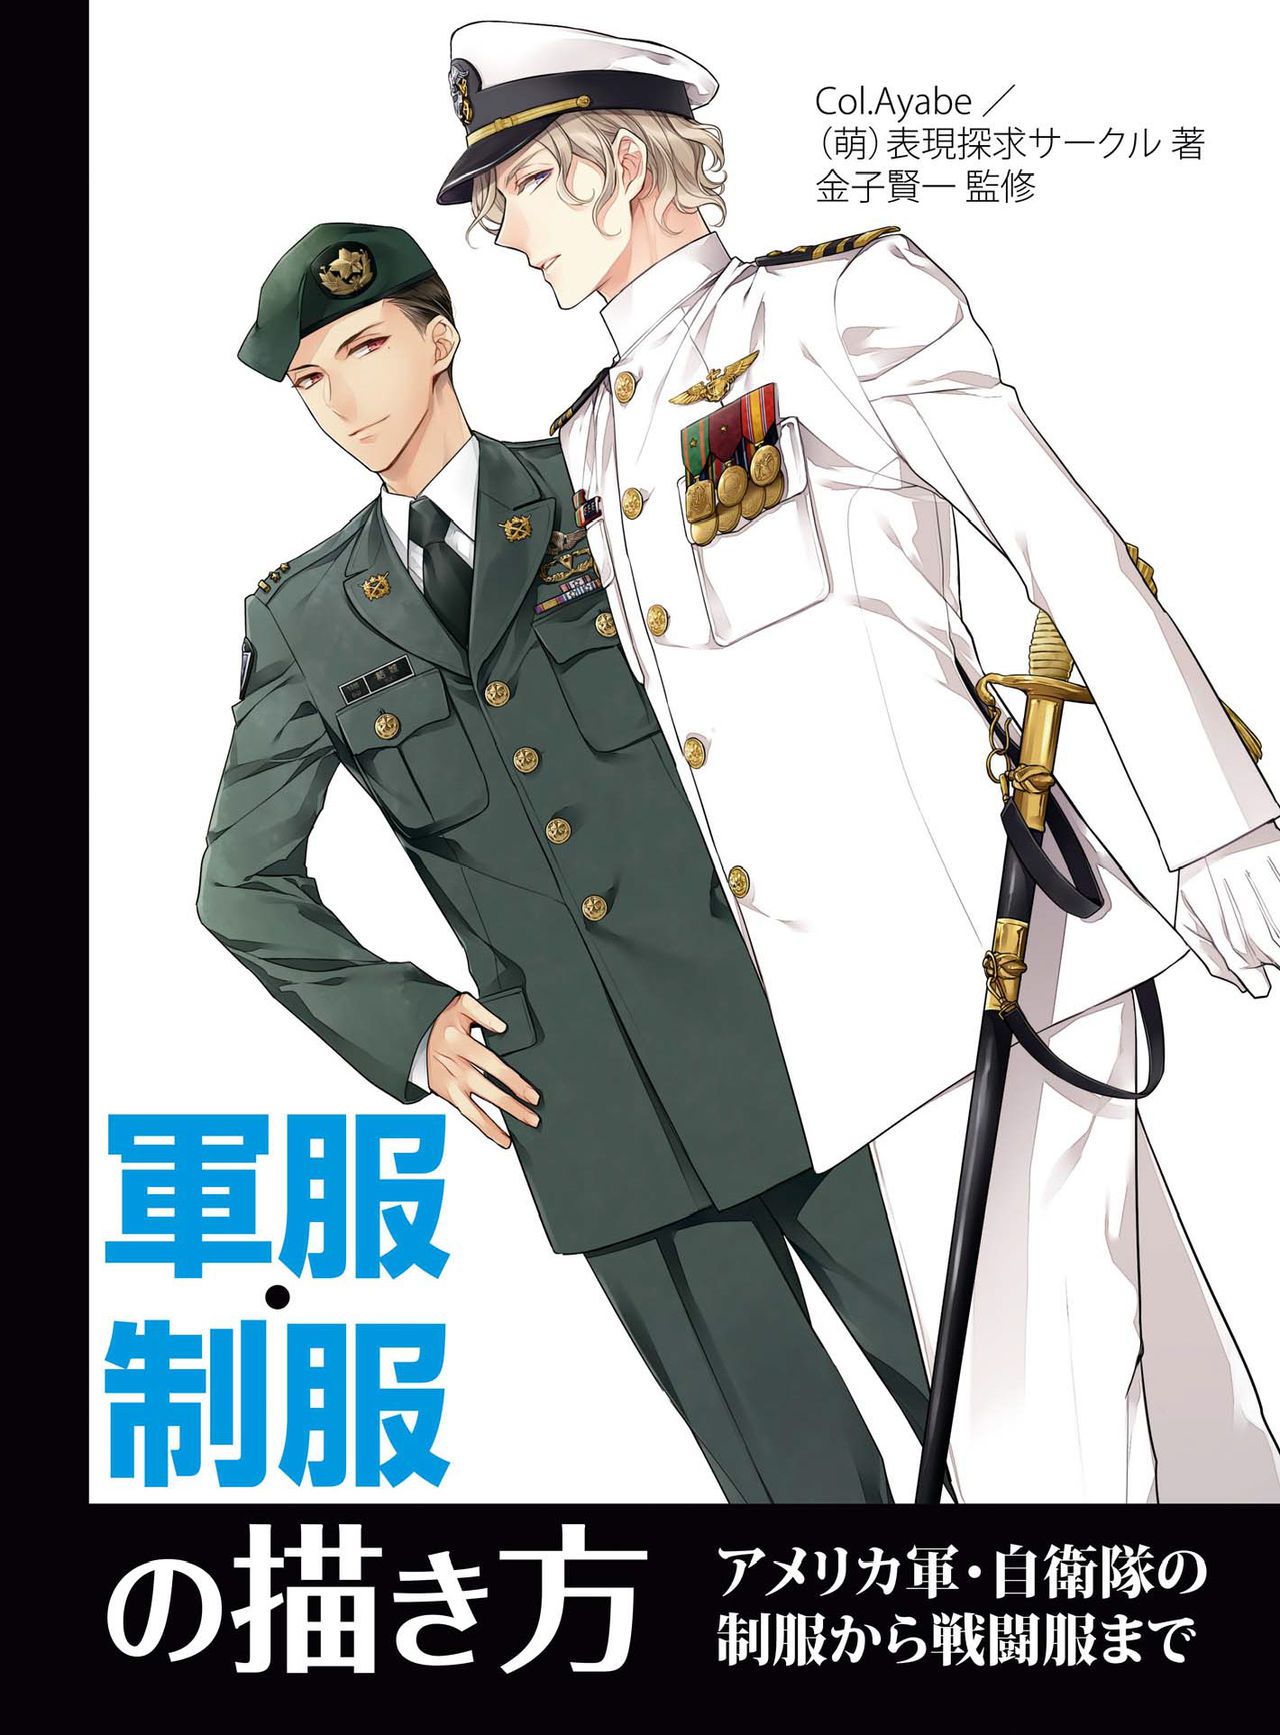 How to draw military uniforms and uniforms From Self-Defense Forces 軍服・制服の描き方 アメリカ軍・自衛隊の制服から戦闘服まで 4